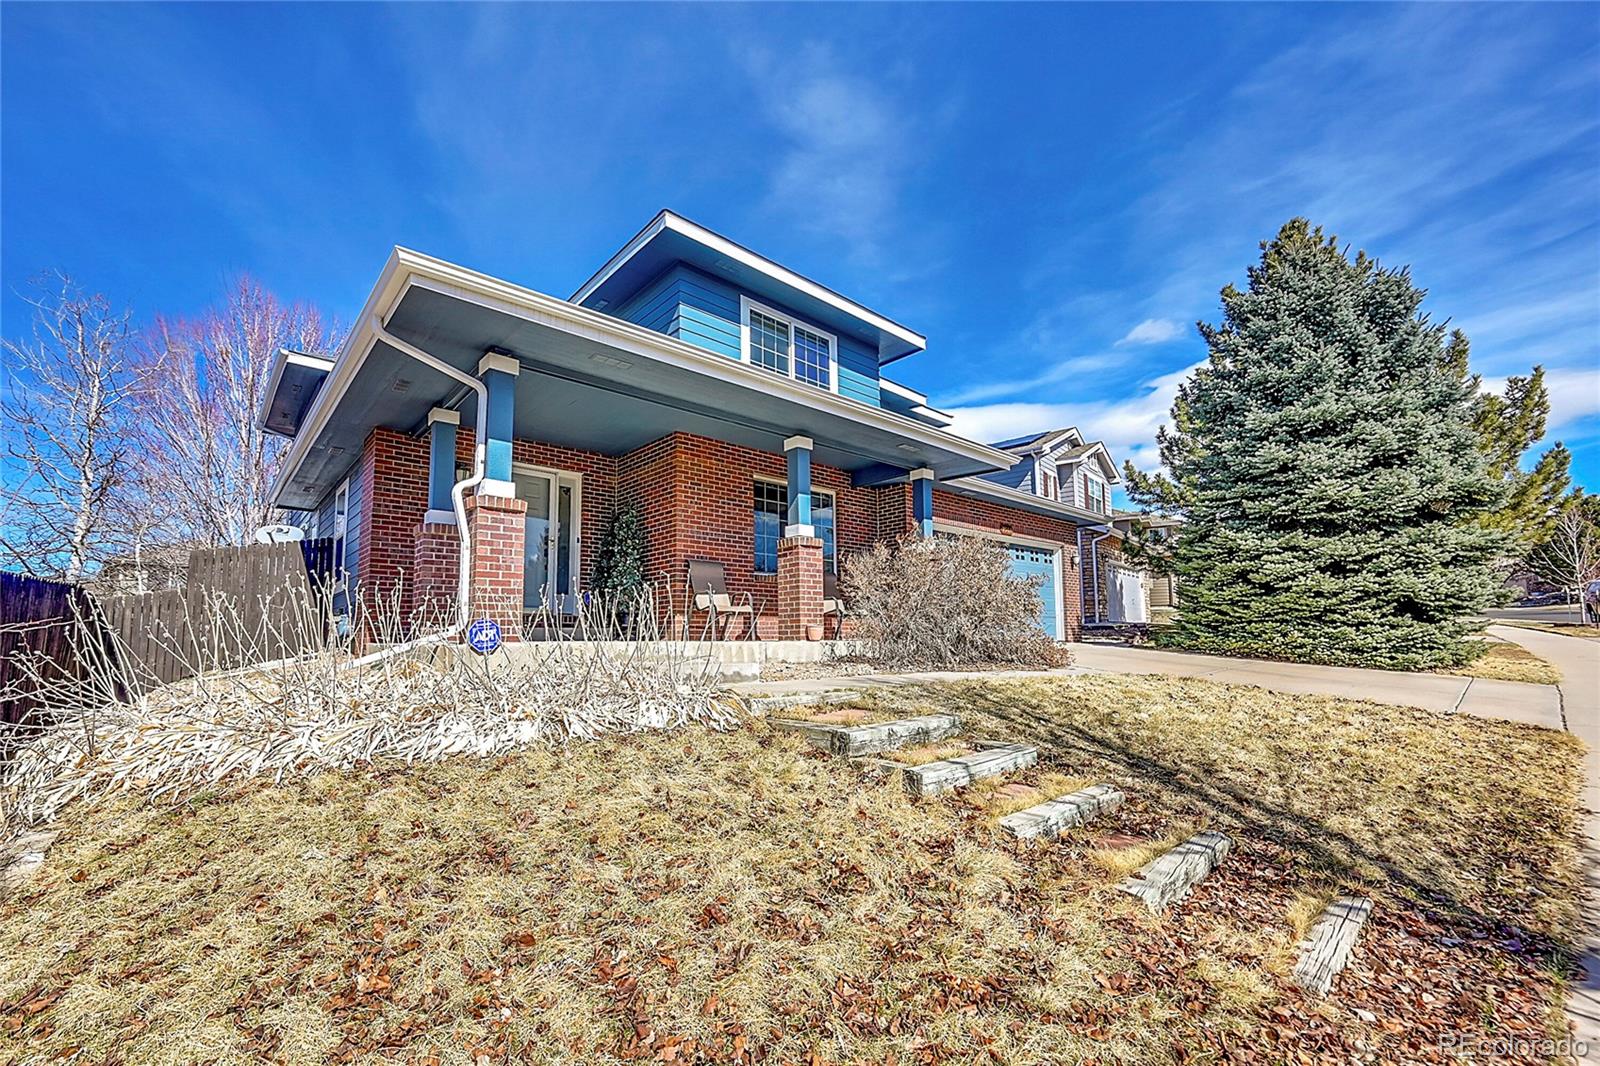 Report Image for 2561 S Fundy Circle,Aurora, Colorado